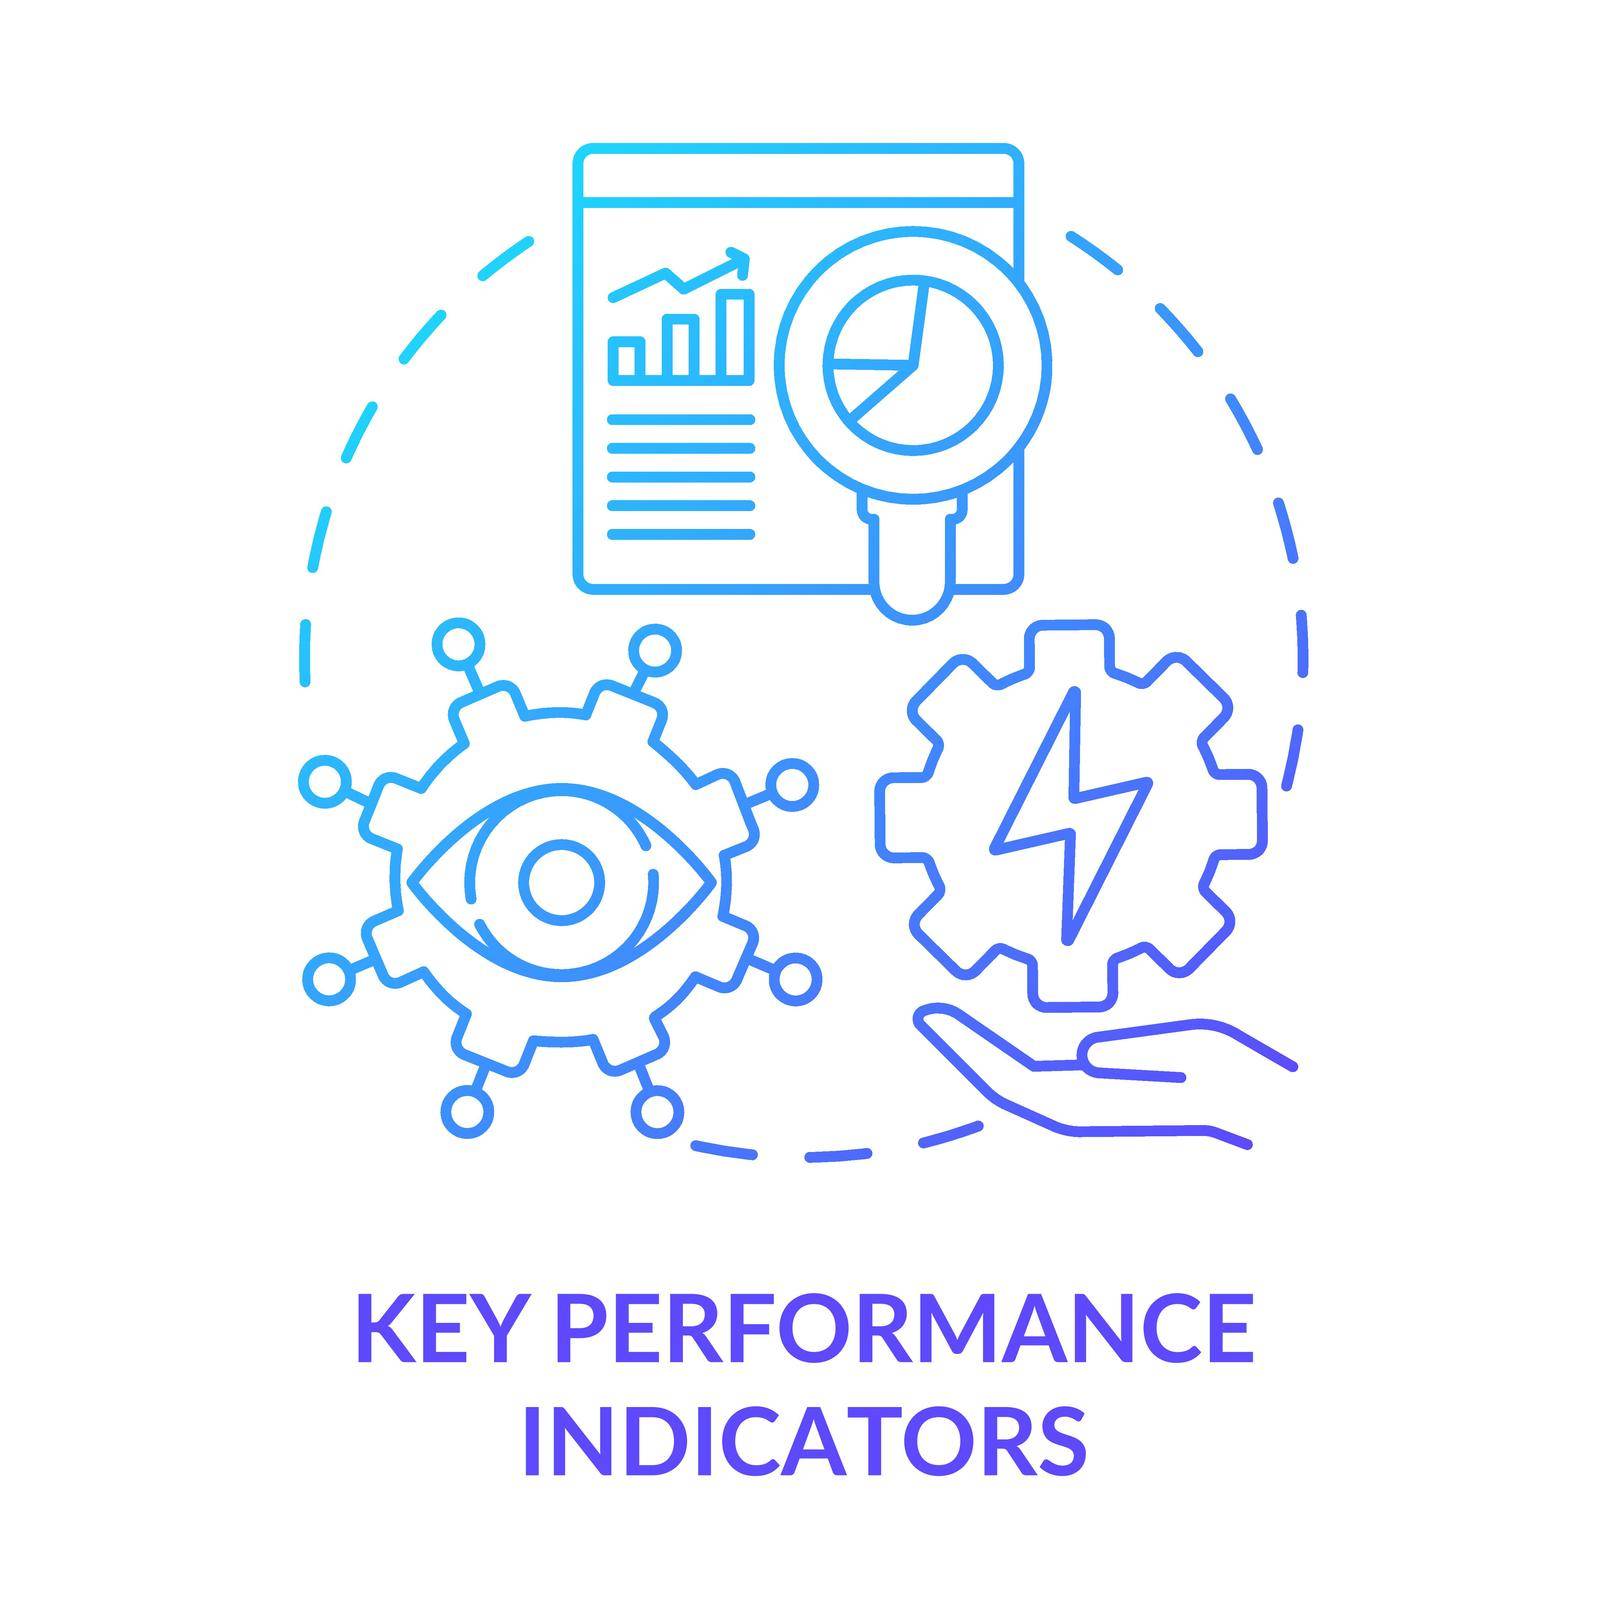 Key performance indicators blue gradient concept icon by bsd